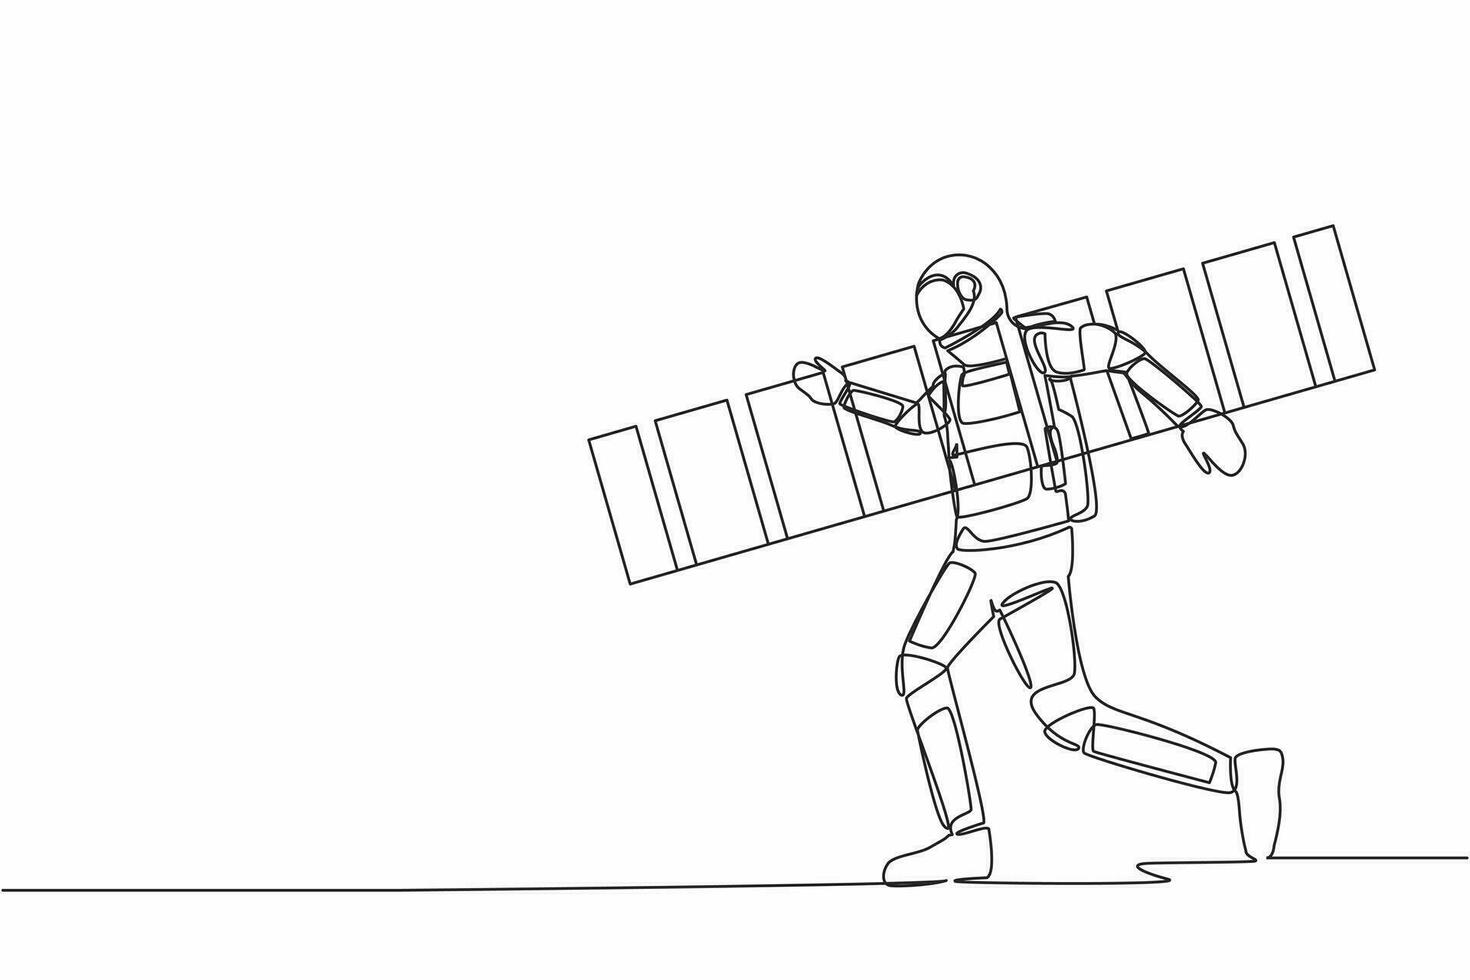 Single one line drawing astronaut repairman walking with ladder. Renovation home. Preparation house reparation in moon surface. Cosmic galaxy space. Continuous line graphic design vector illustration